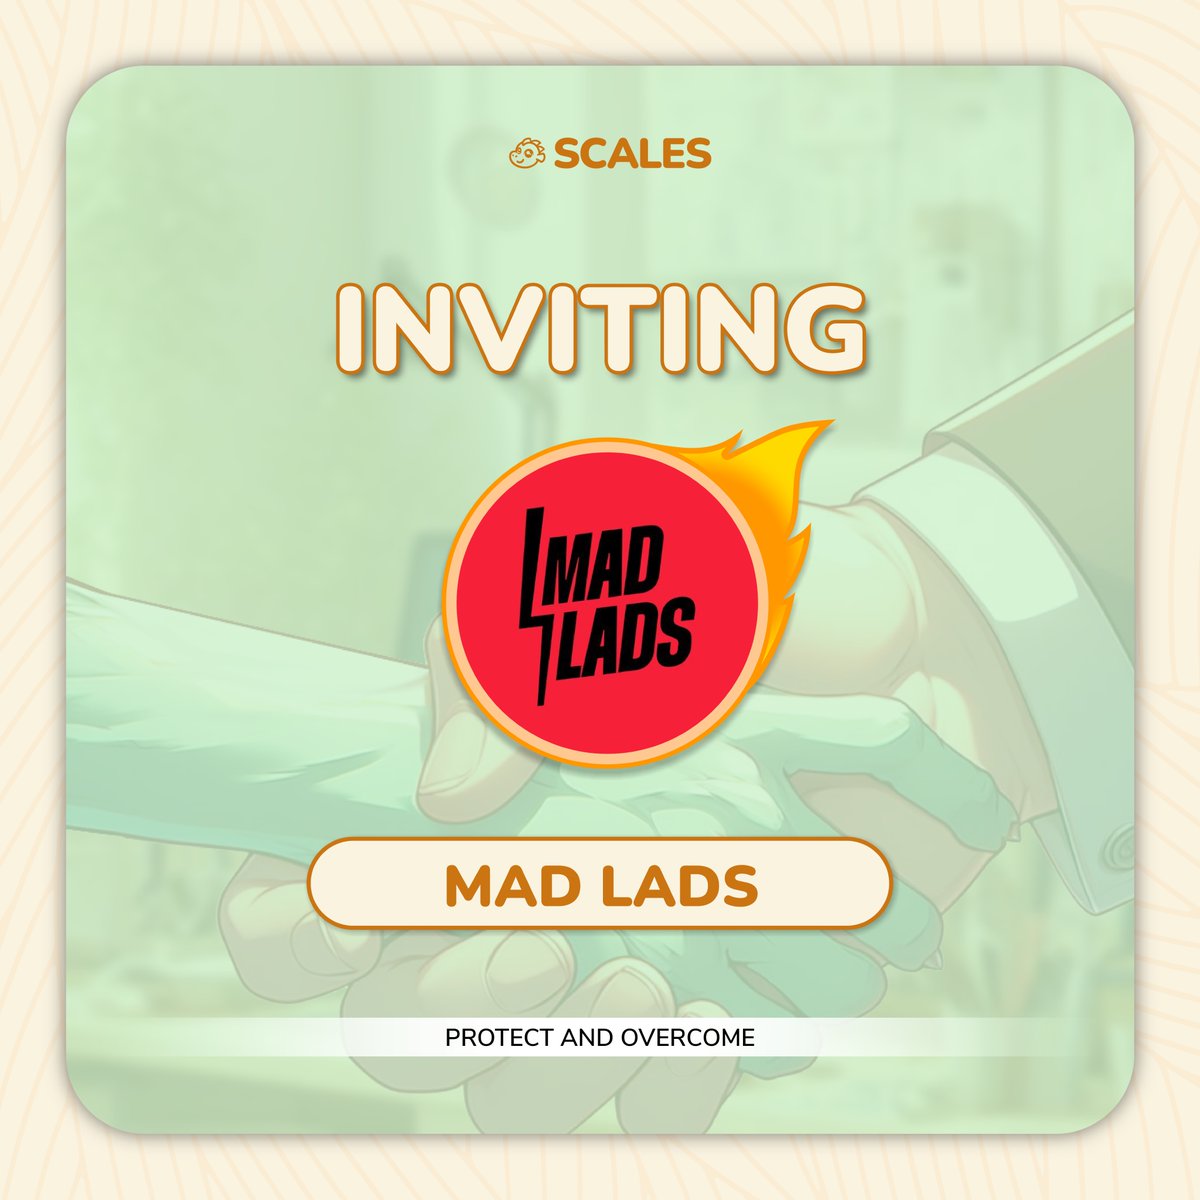 We would like to formally invite the @MadLads community to join SCALES on our ventures in wallet security💚 Join our Discord now to get Protected and secure your $SCALES airdrop